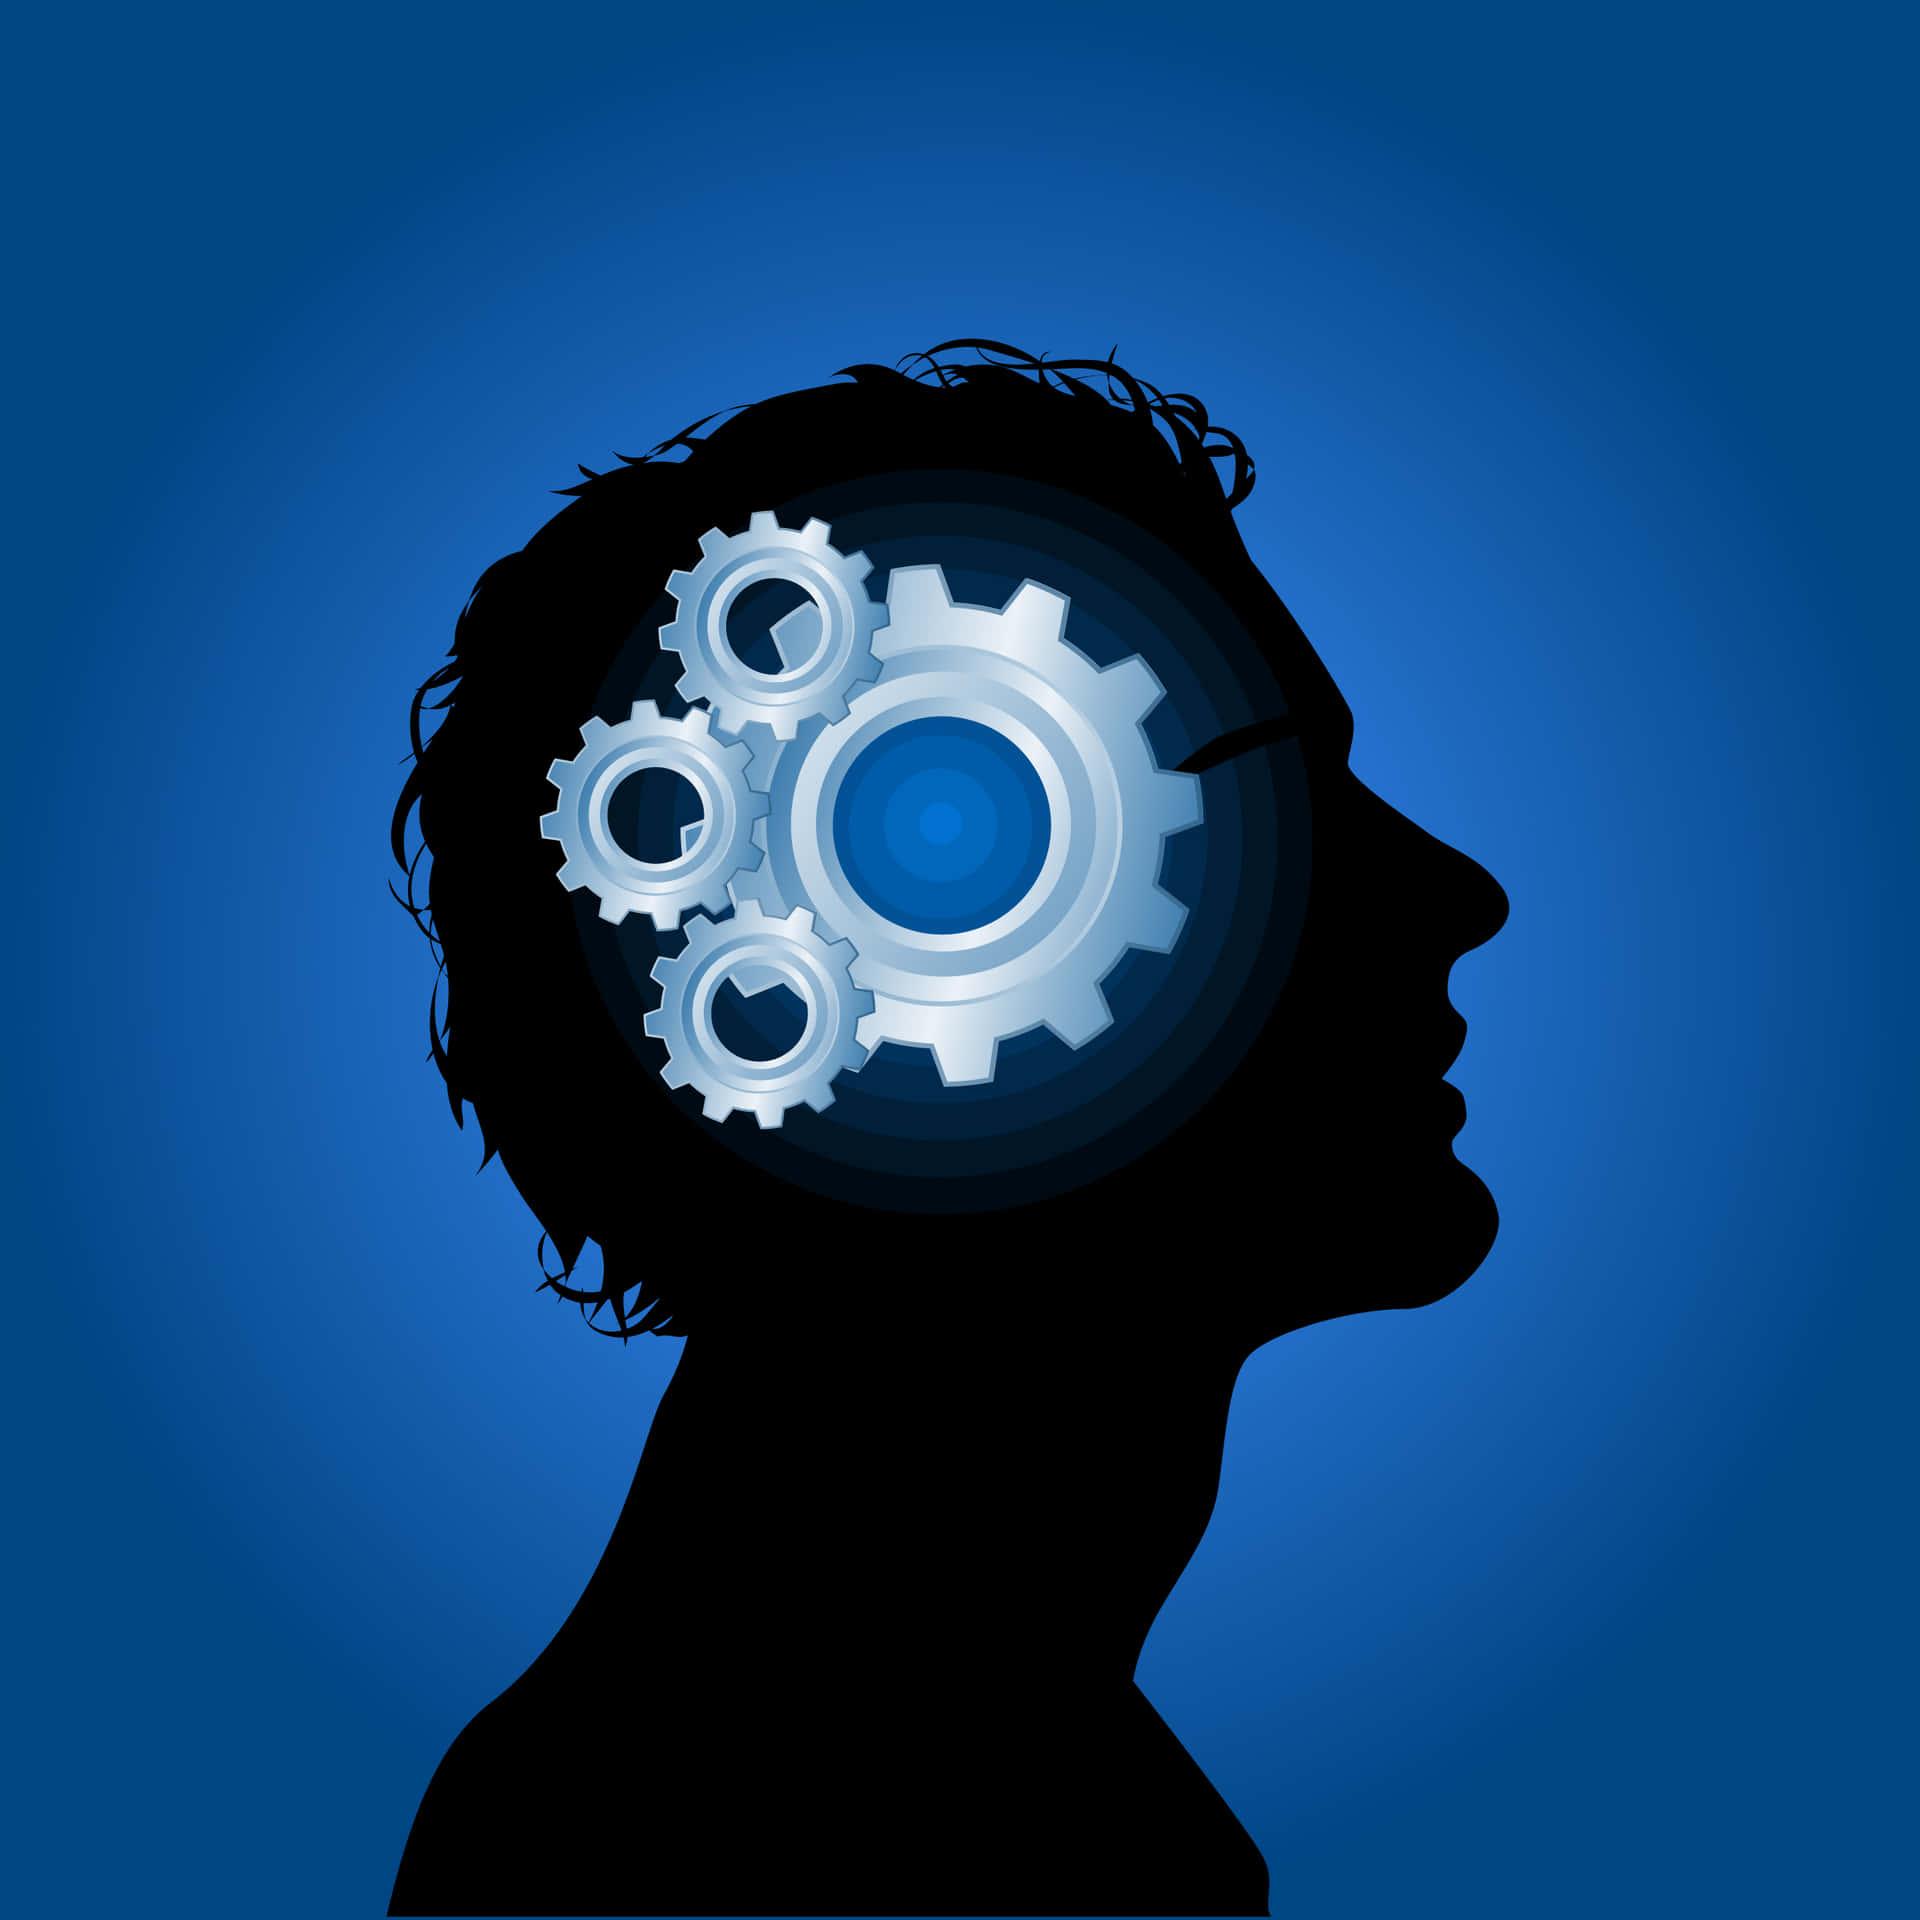 Man's Head With Gears And Gears In The Center Vector